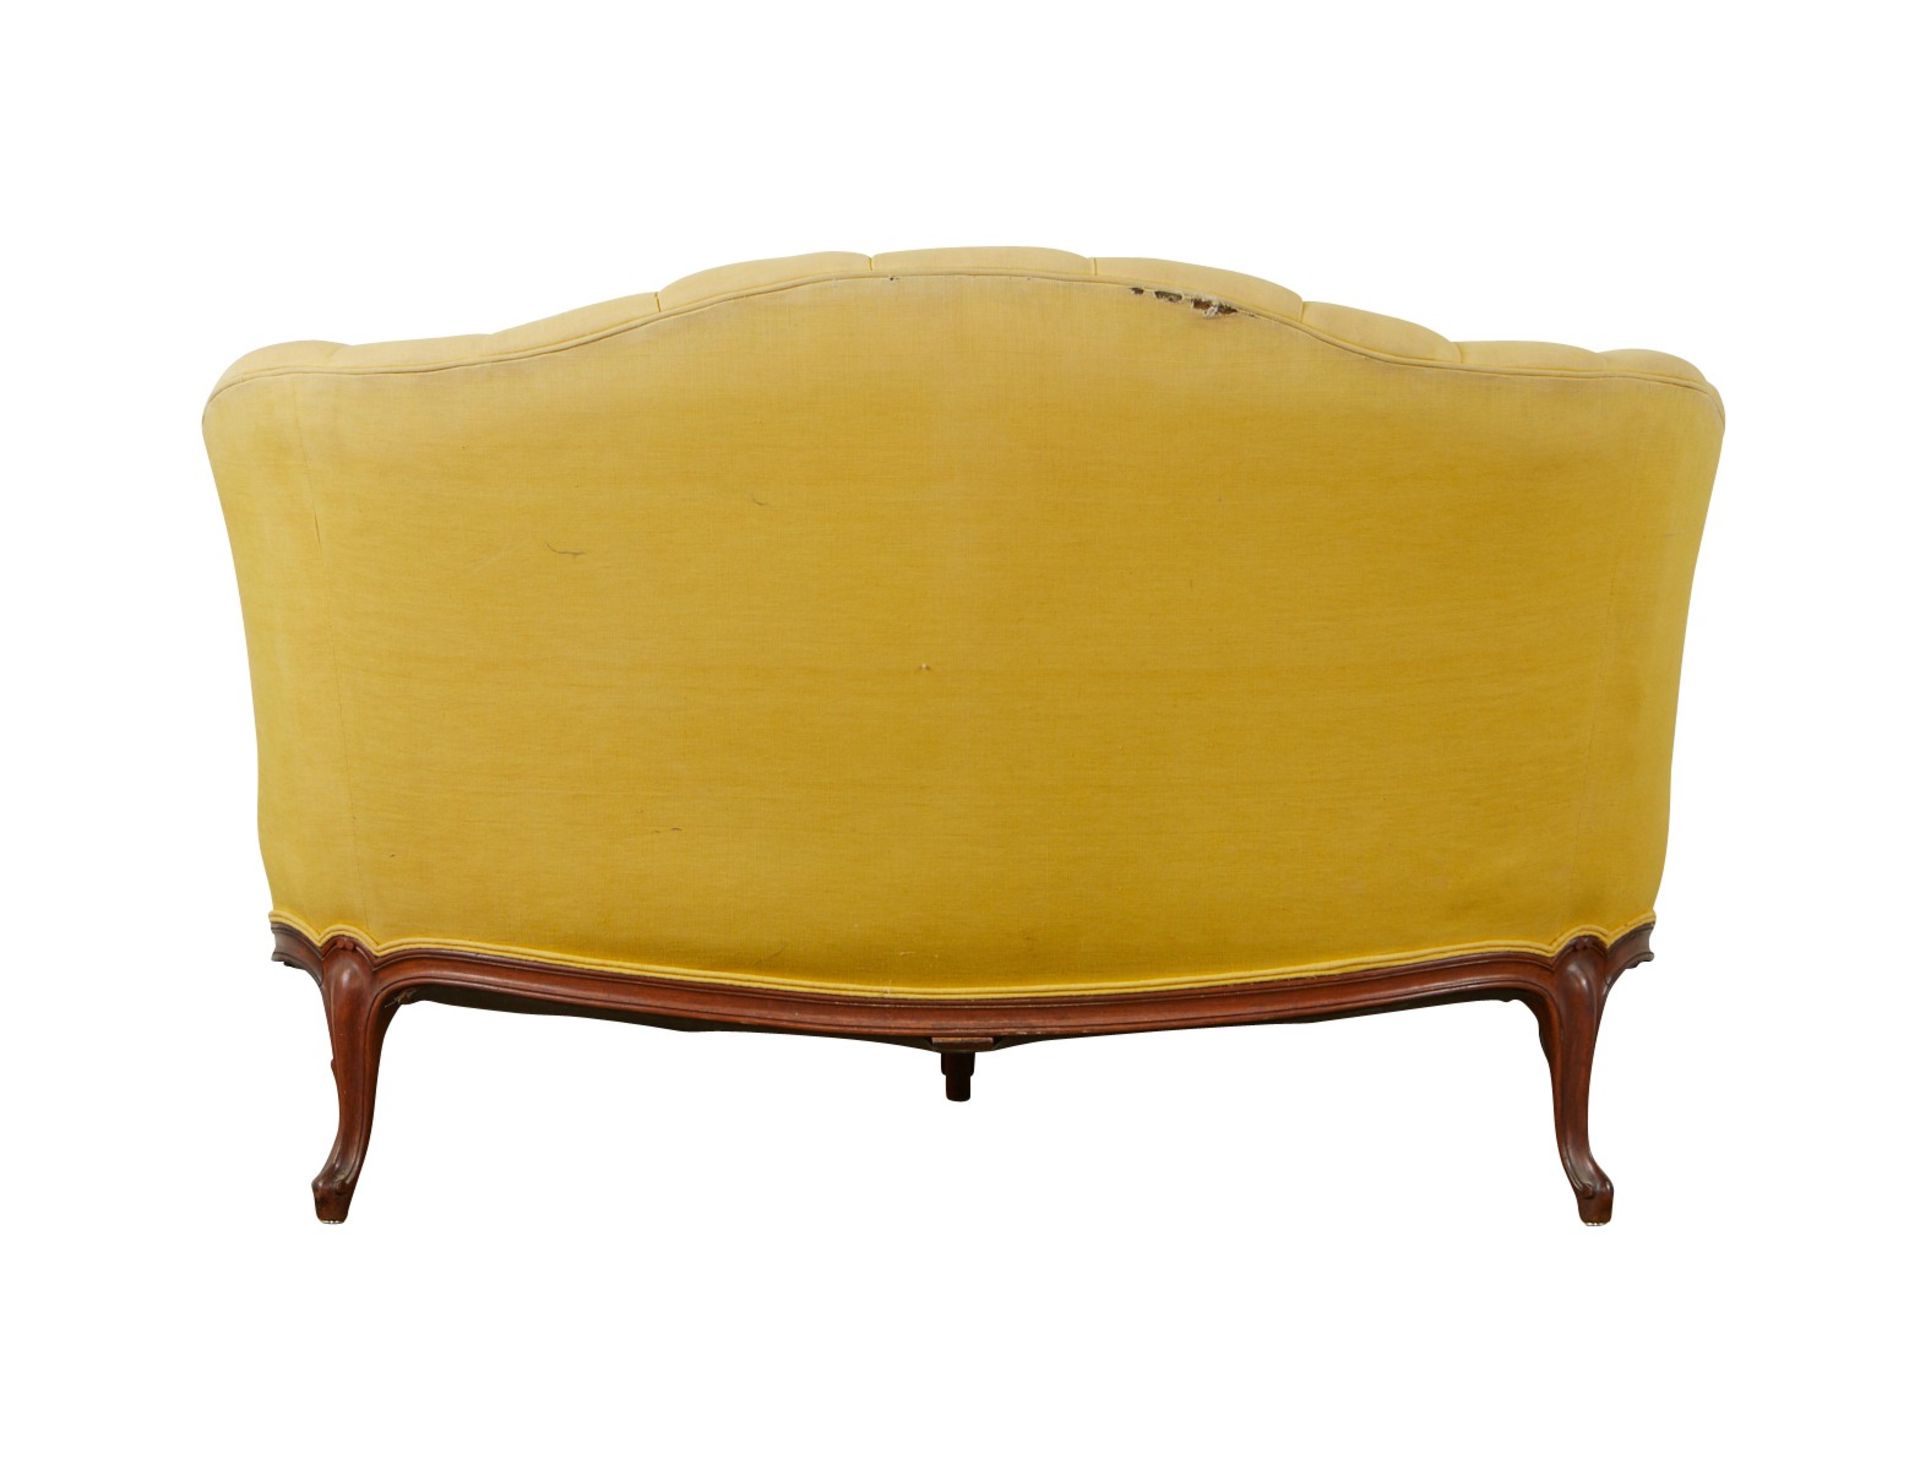 19th c. French Settee w/ Yellow Upholstery - Image 3 of 6